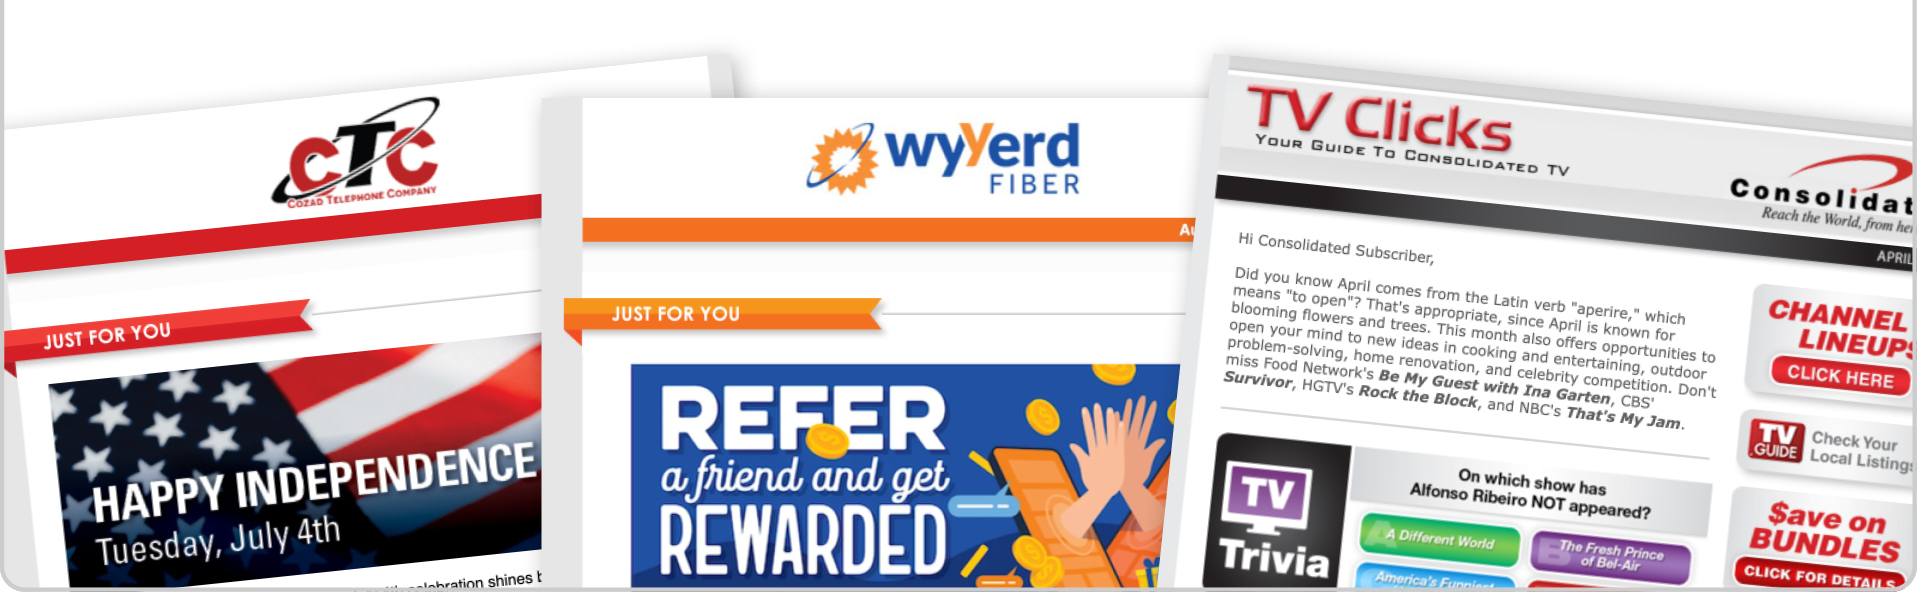 email marketing for broadband internet, tv and wireless enewsletters